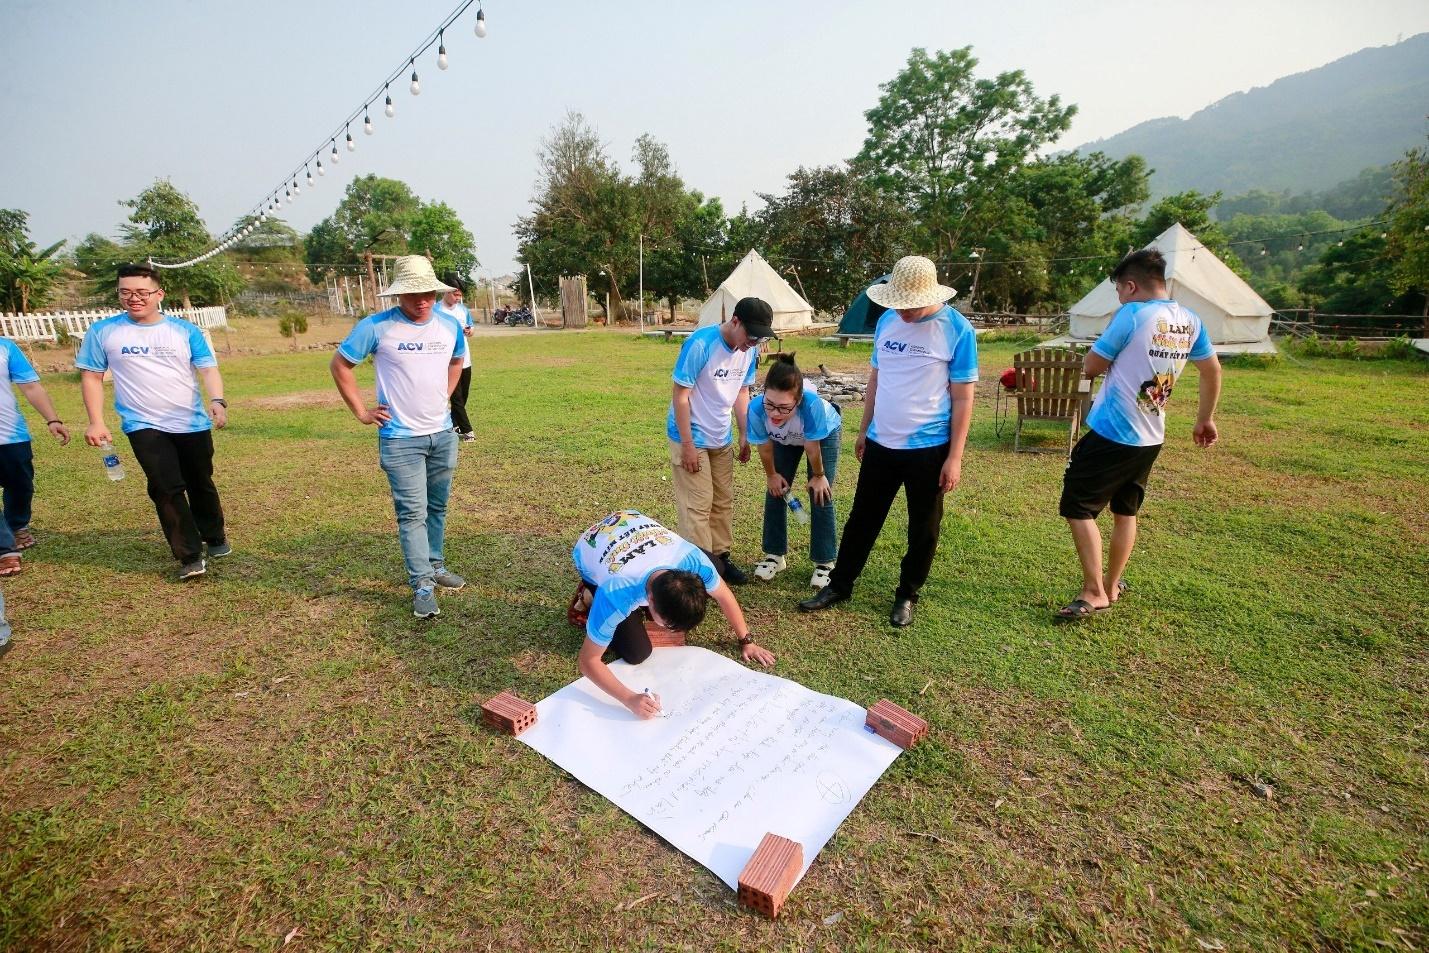 A group of people in a field writing on a large piece of paperDescription automatically generated